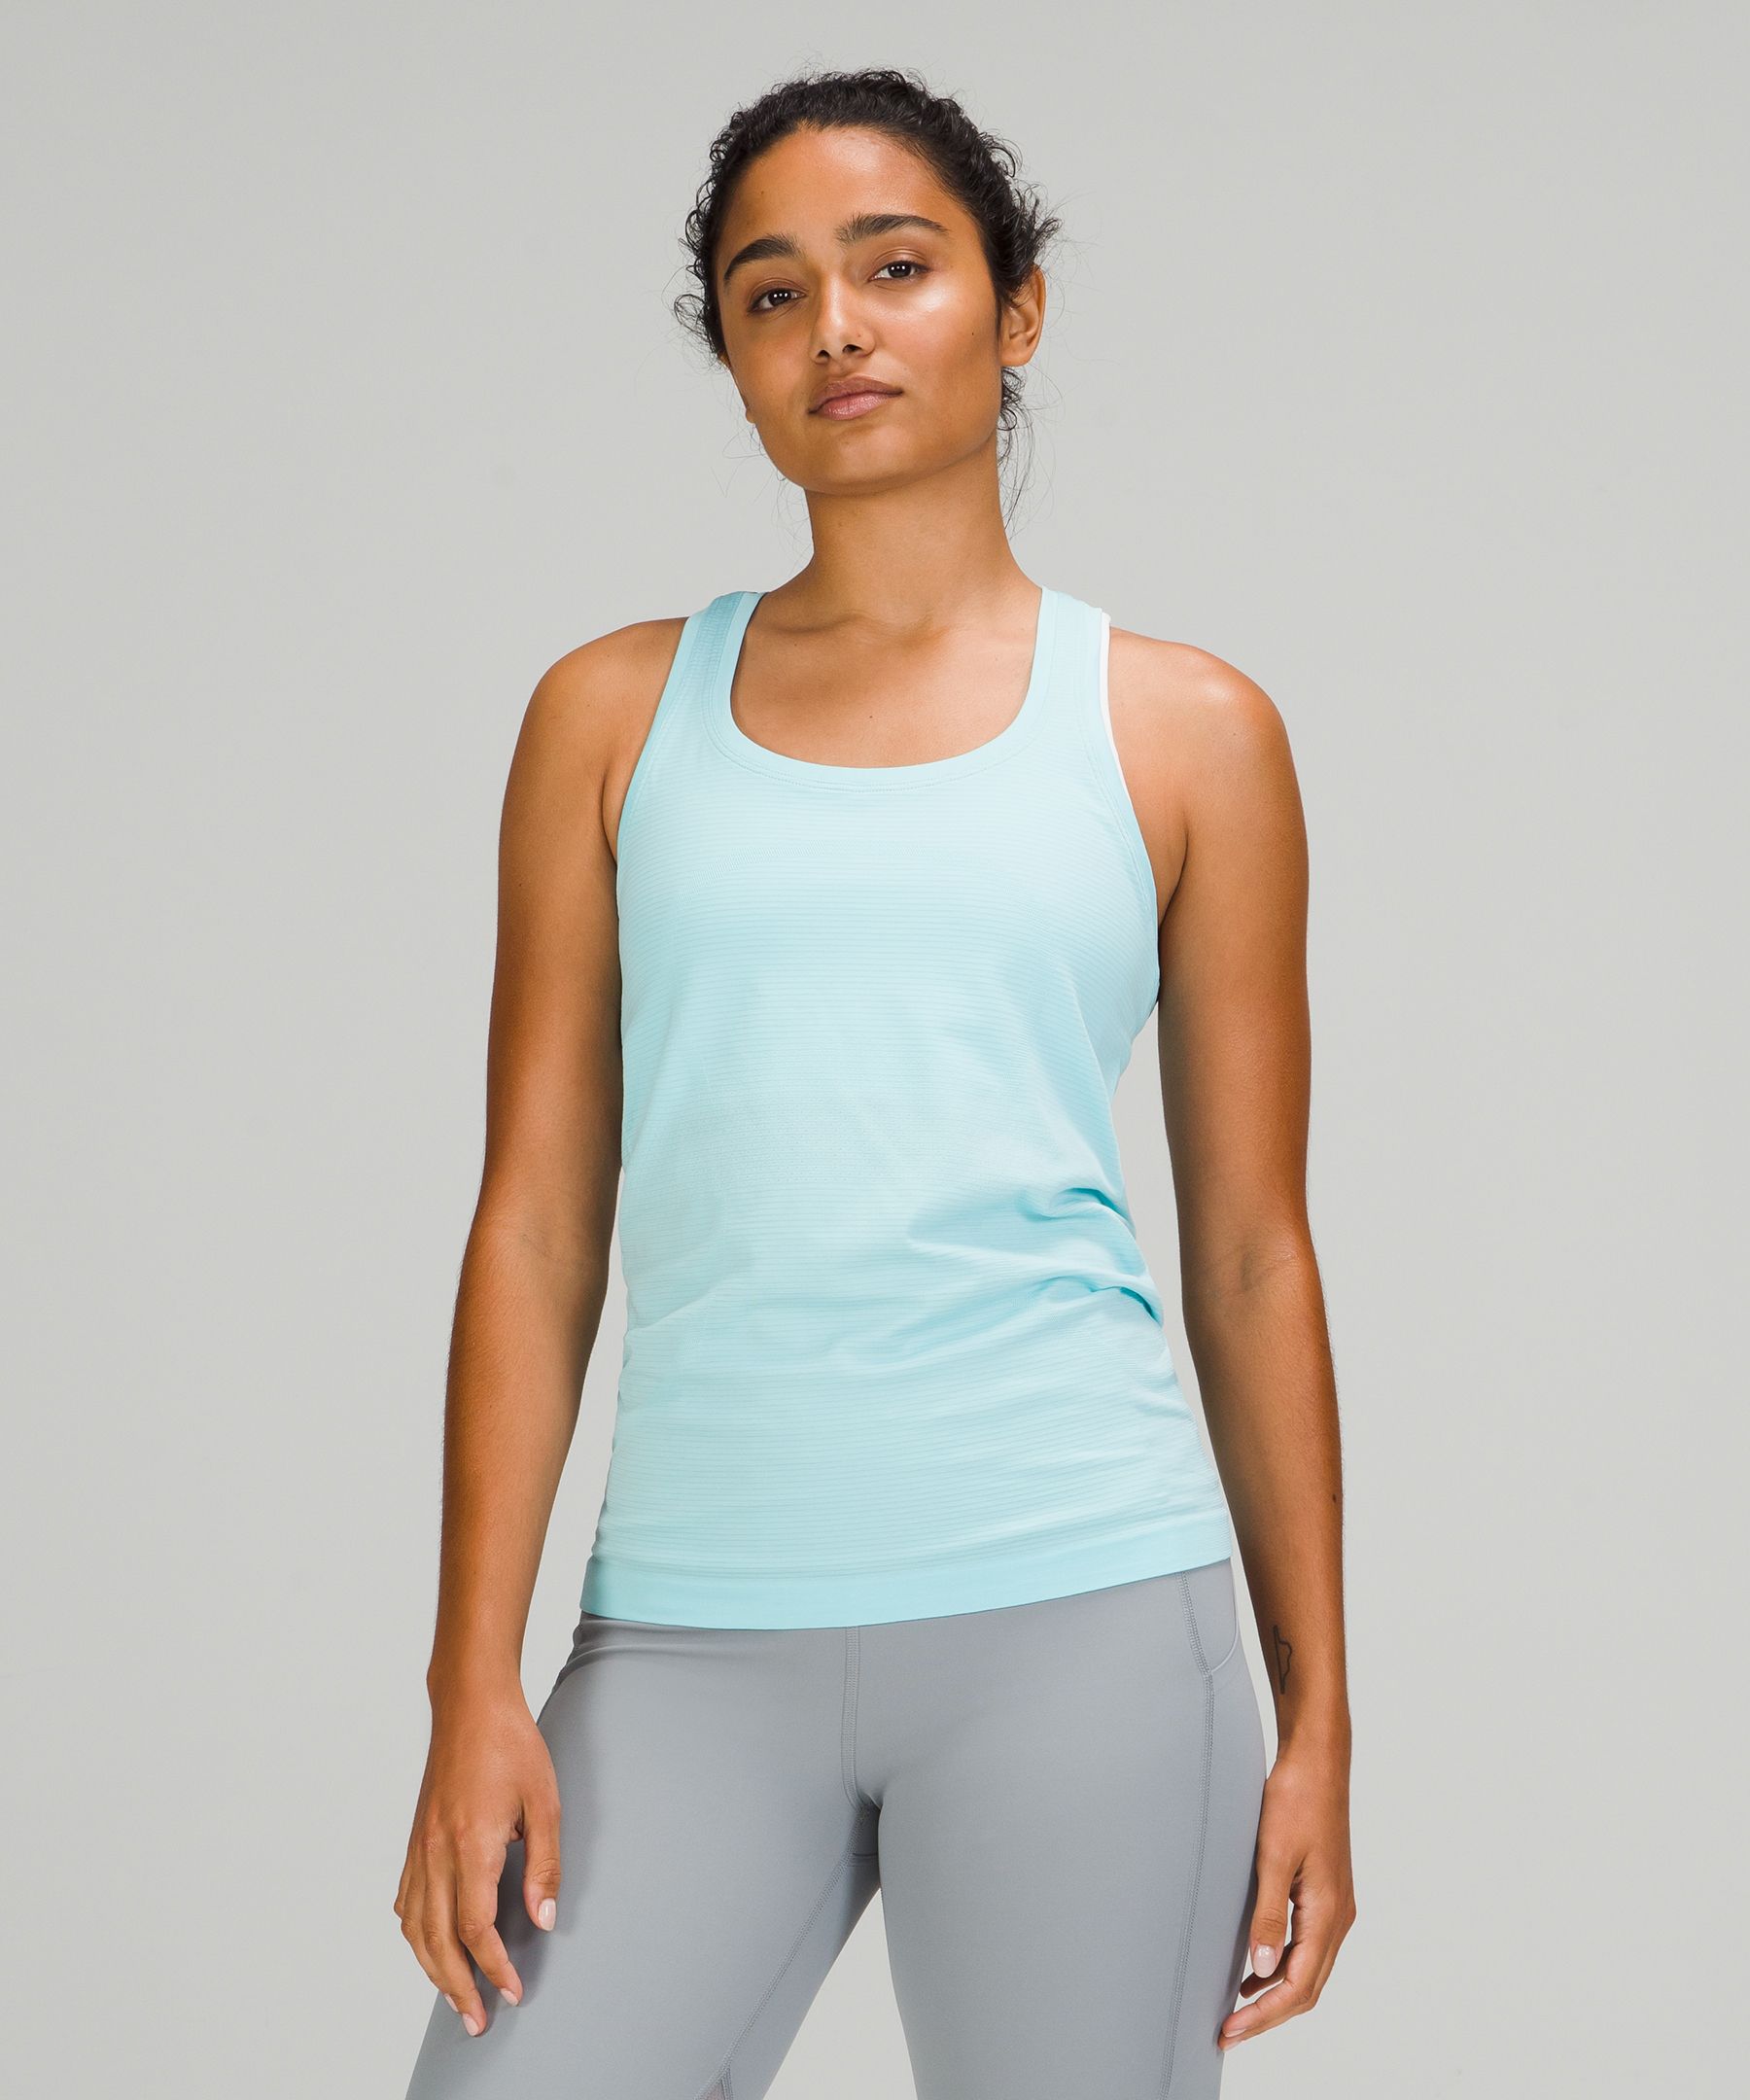 Lululemon Swiftly Tech Racerback Tank Top 2.0 In Icing Blue/icing Blue ...